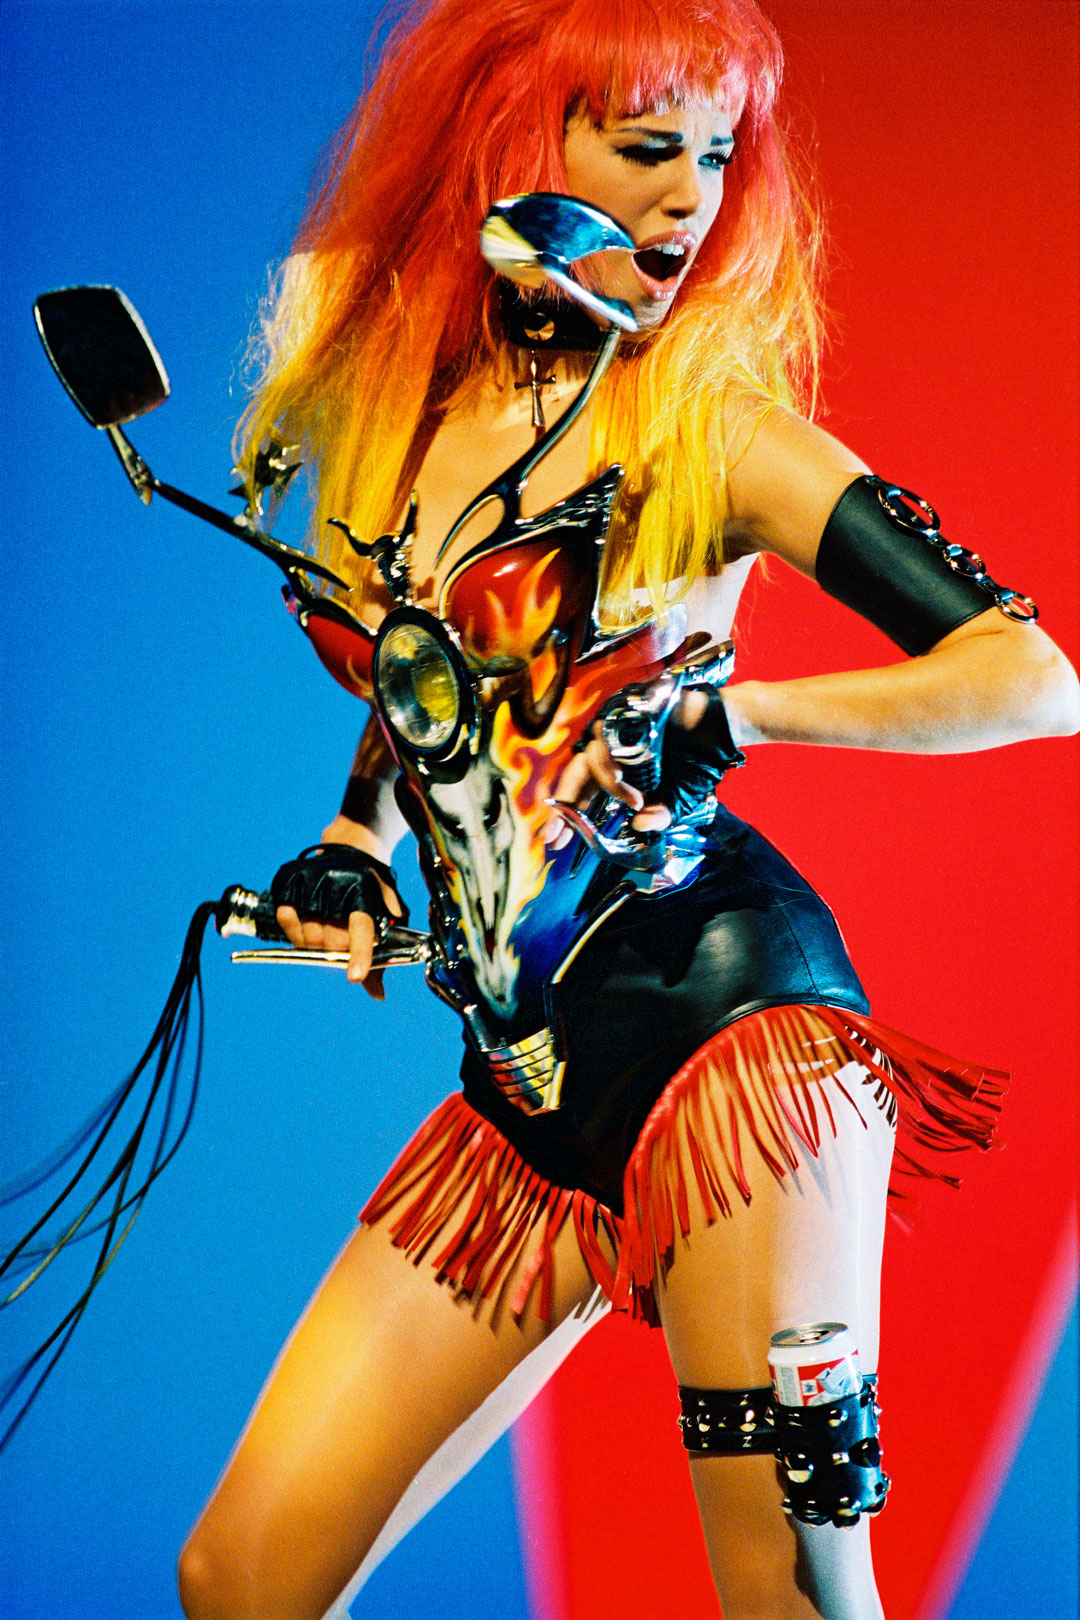 Patrice Stable, Model Emma Sjöberg Wiklund on the Set of George Michael’s Too Funky Video Shoot, Paris, 1992. Outfit: Thierry Mugler: Les Cow-boys collection, prêt-à-porter  spring/summer 1992. “Motorcyle-fairing” bustier of hand- painted Plexiglas (Jean-Jacques Urcun), padded heart on the back. Fringed leather shorts. Matching “Budweiser” garter. Photo: © Patrice Stable.